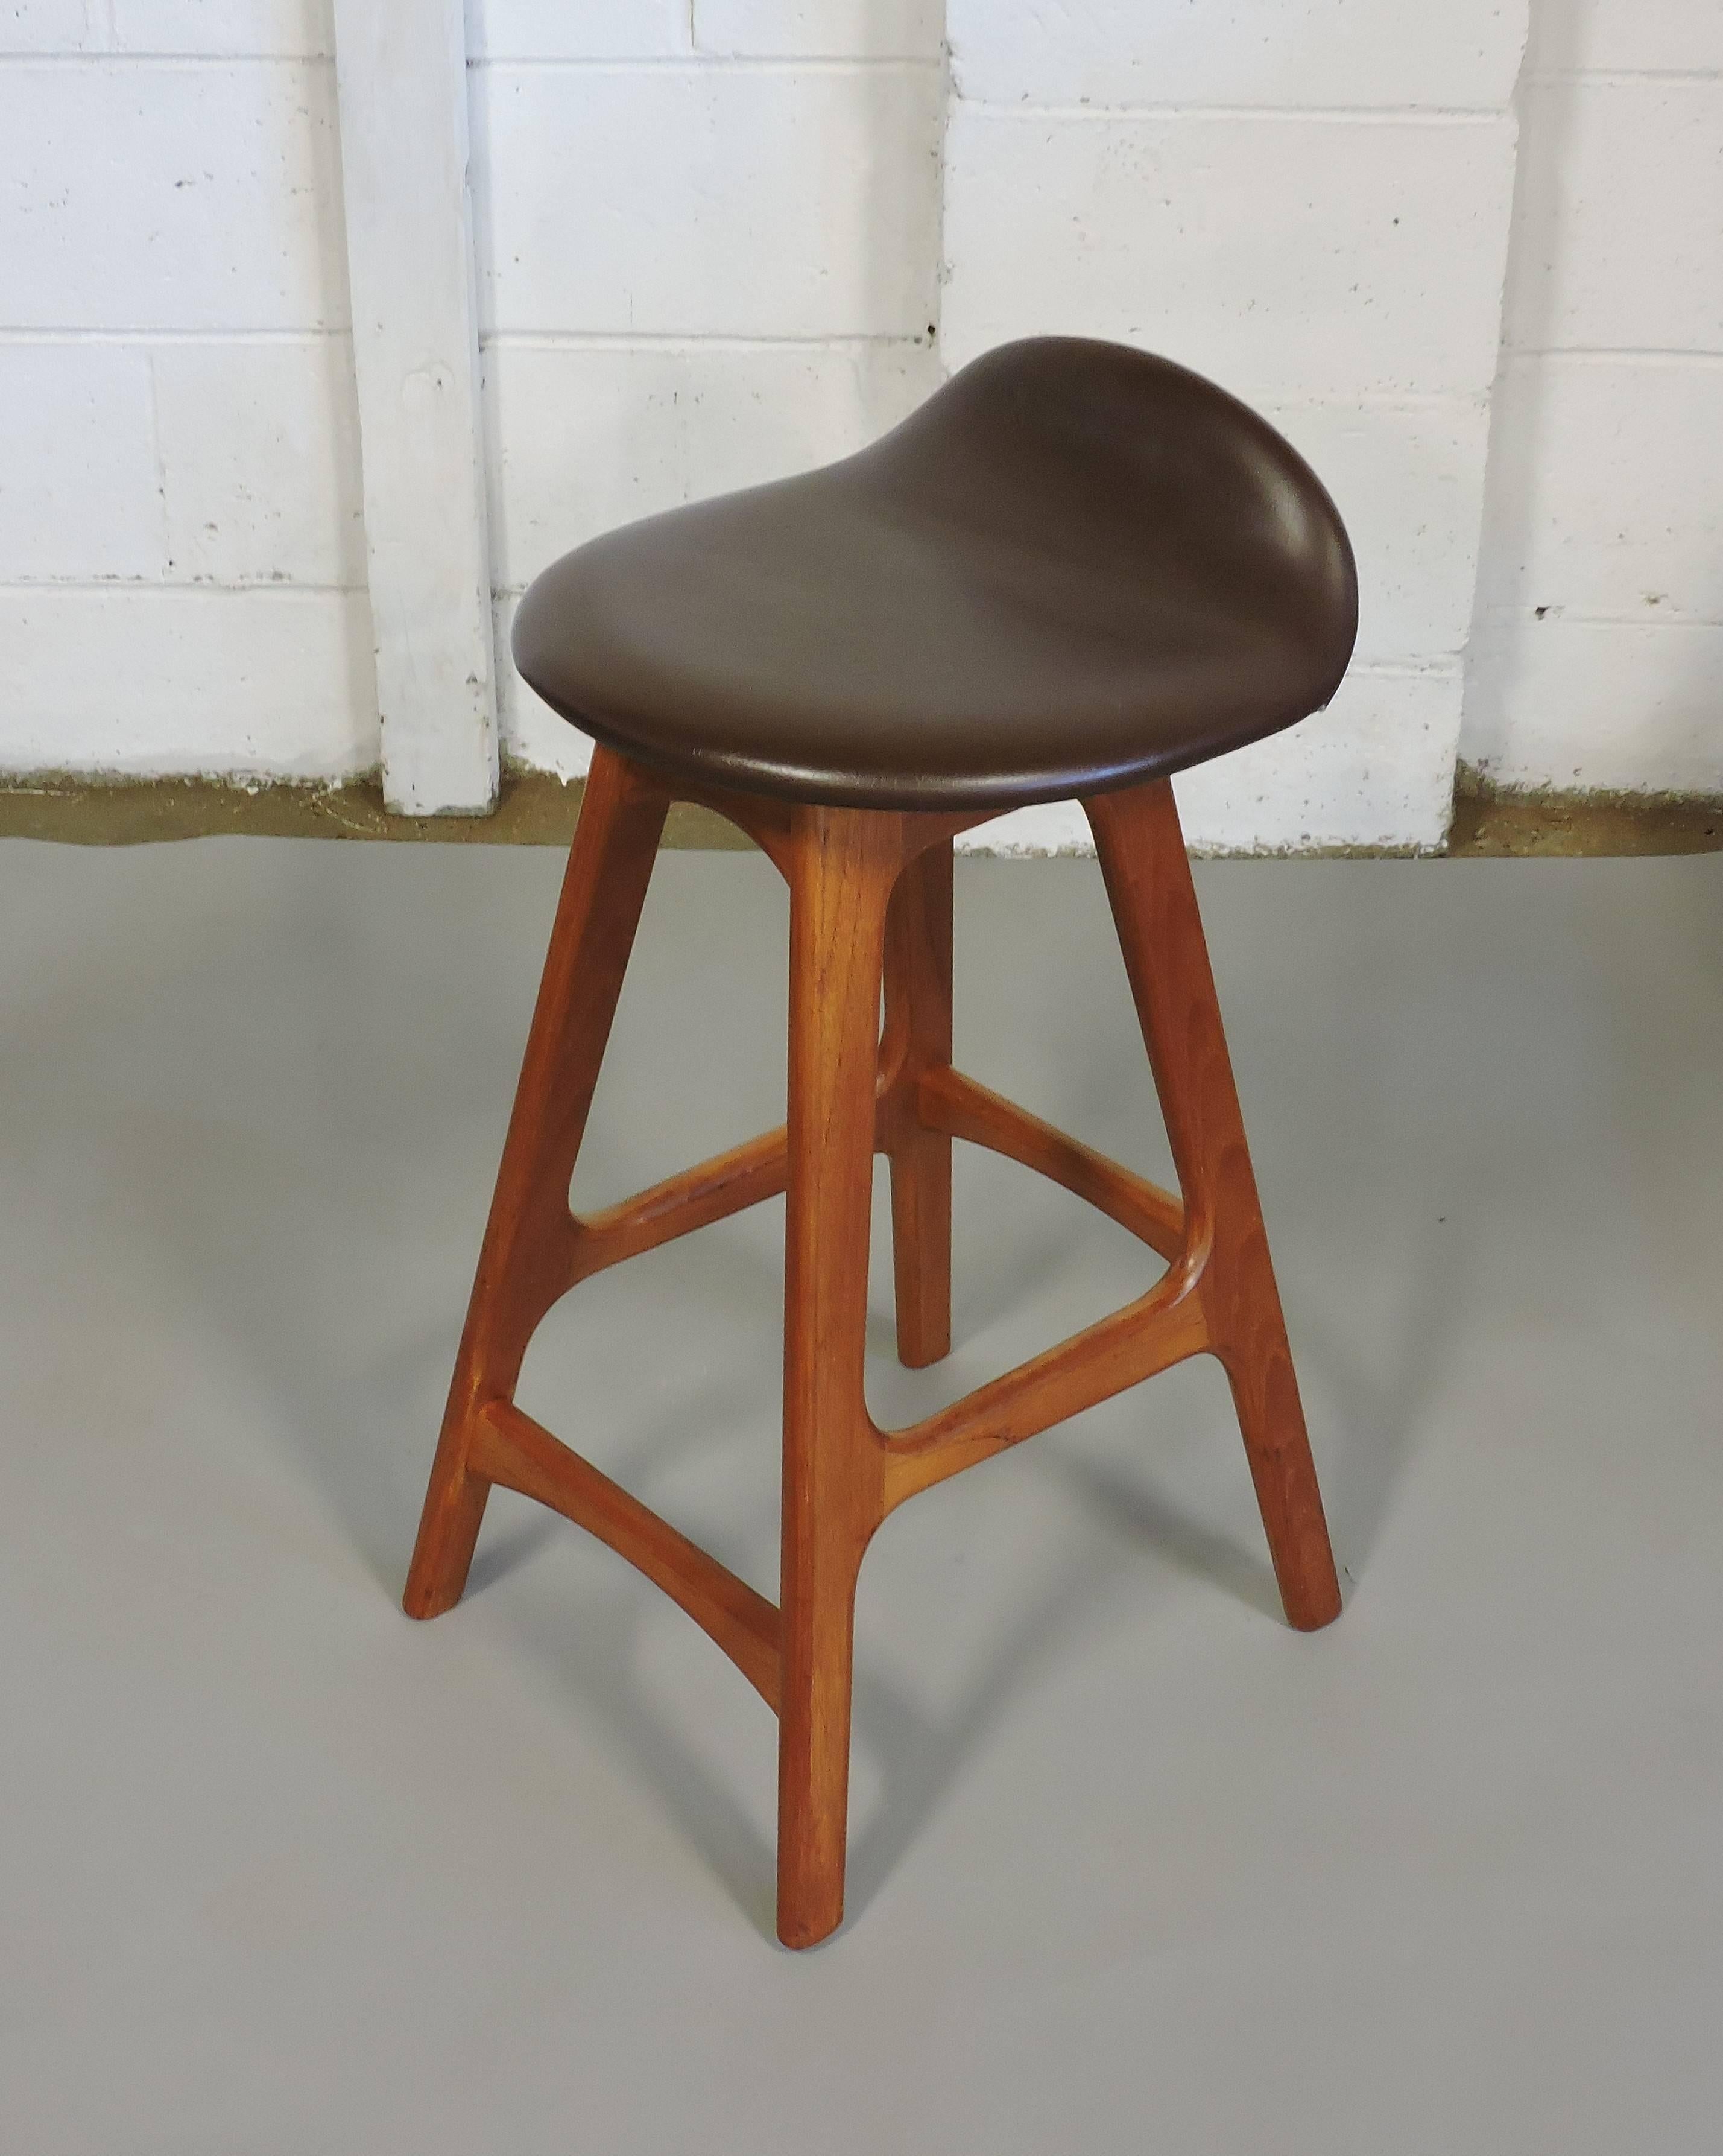 Sleek Danish modern counter stool designed by Erik Buck and made in Denmark by O.D. Mobler. This stool is made of solid sculpted teak and has a curved brown Naugahyde upholstered seat.